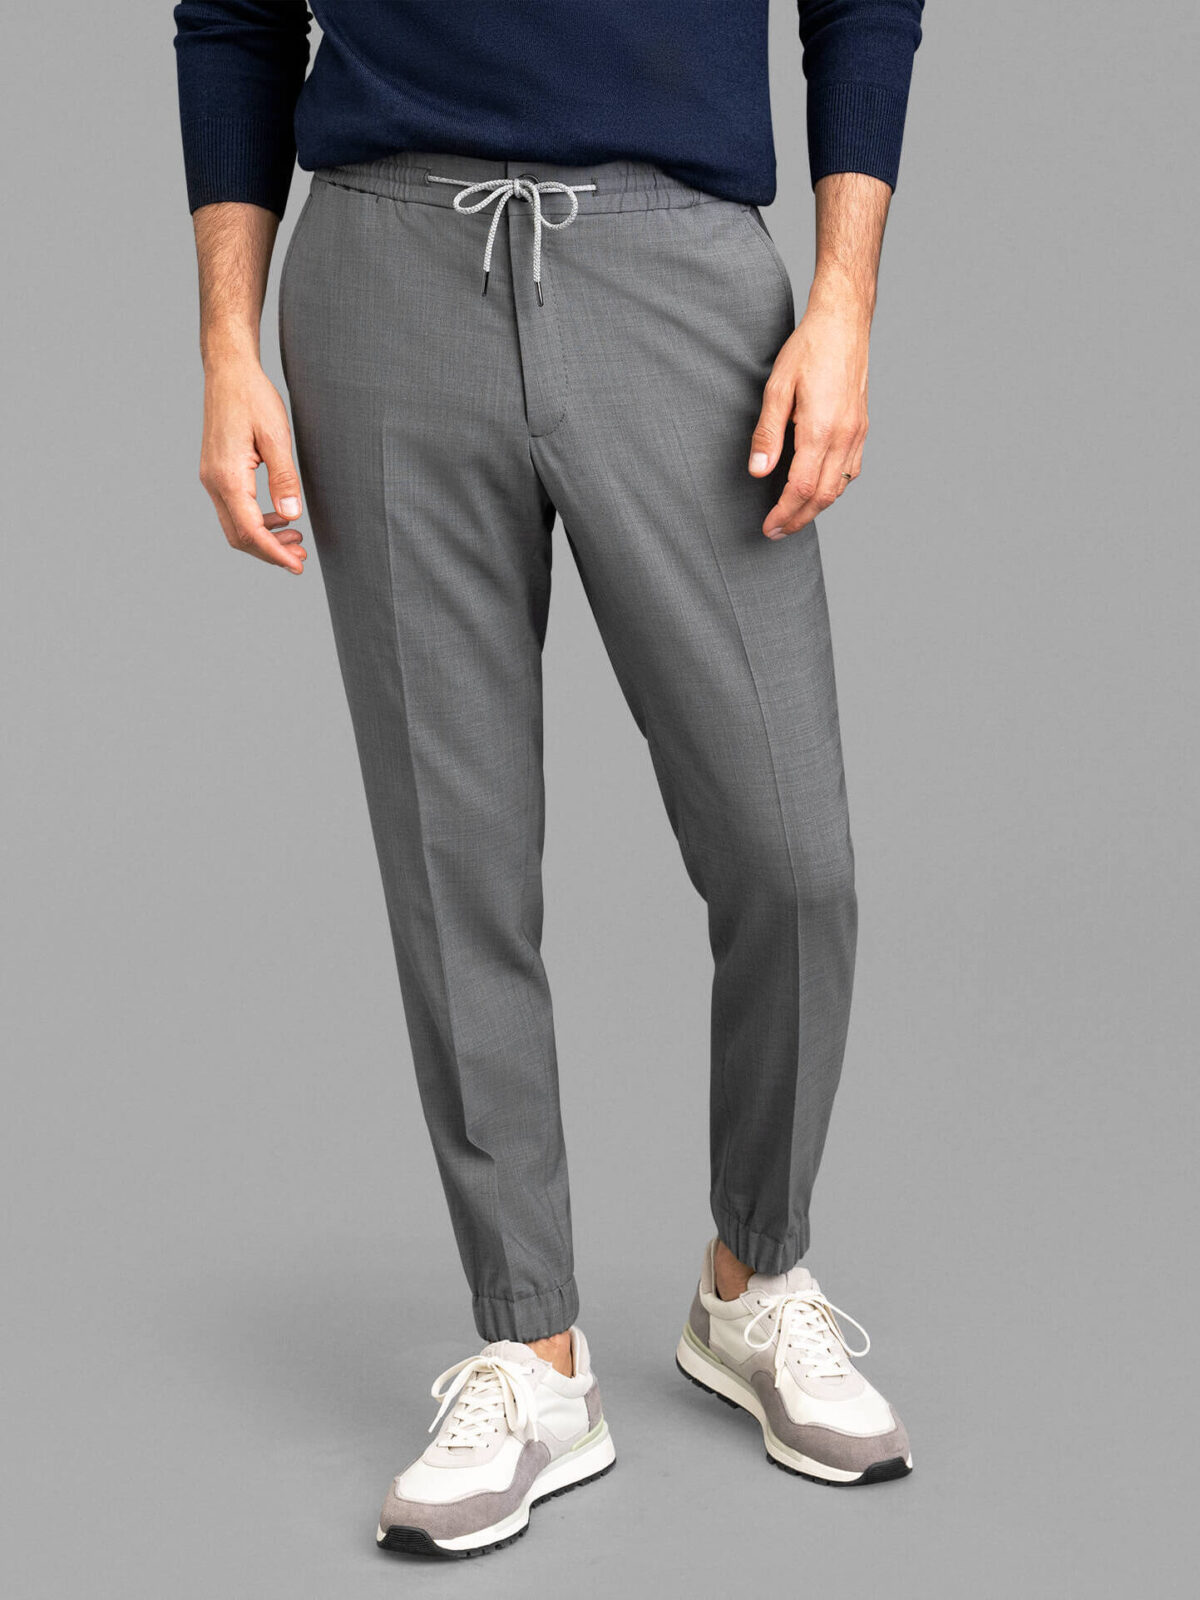 Are These Stretchy Pants Better Than LuLuLemon? — The Peak Lapel